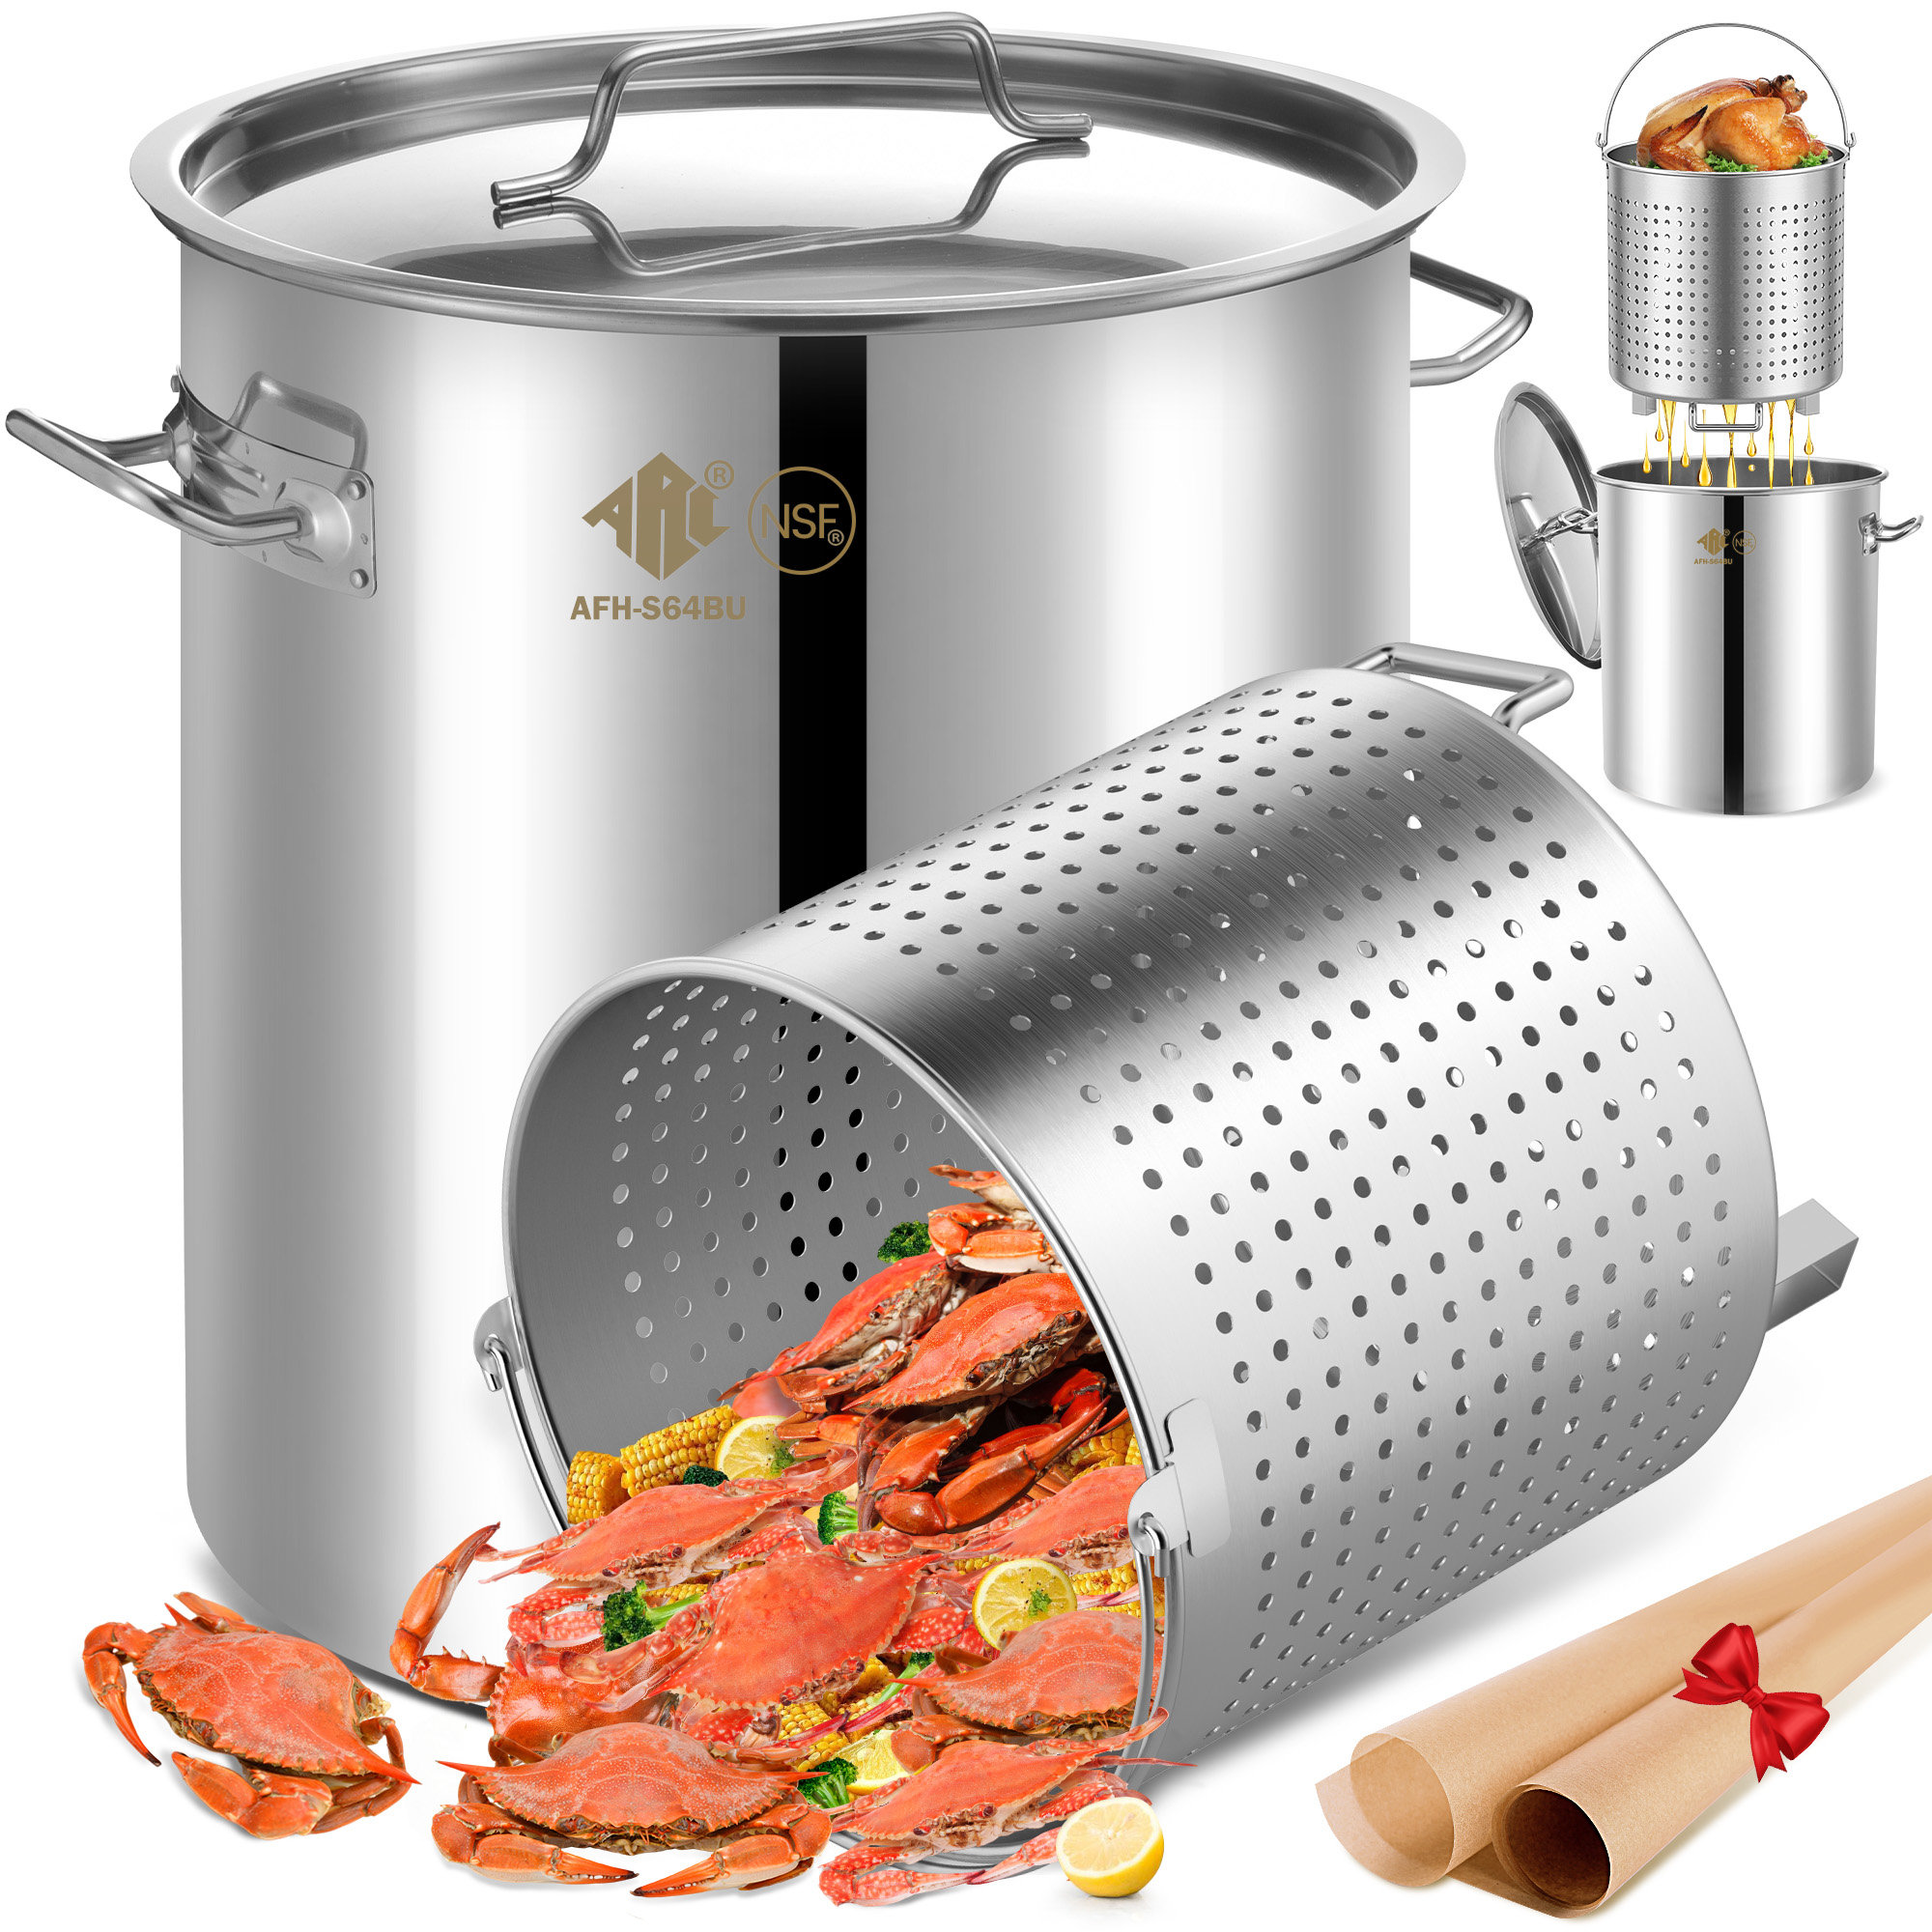 Nutrichef 18/8 Heavy Duty Stainless Steel Large Stock Pot